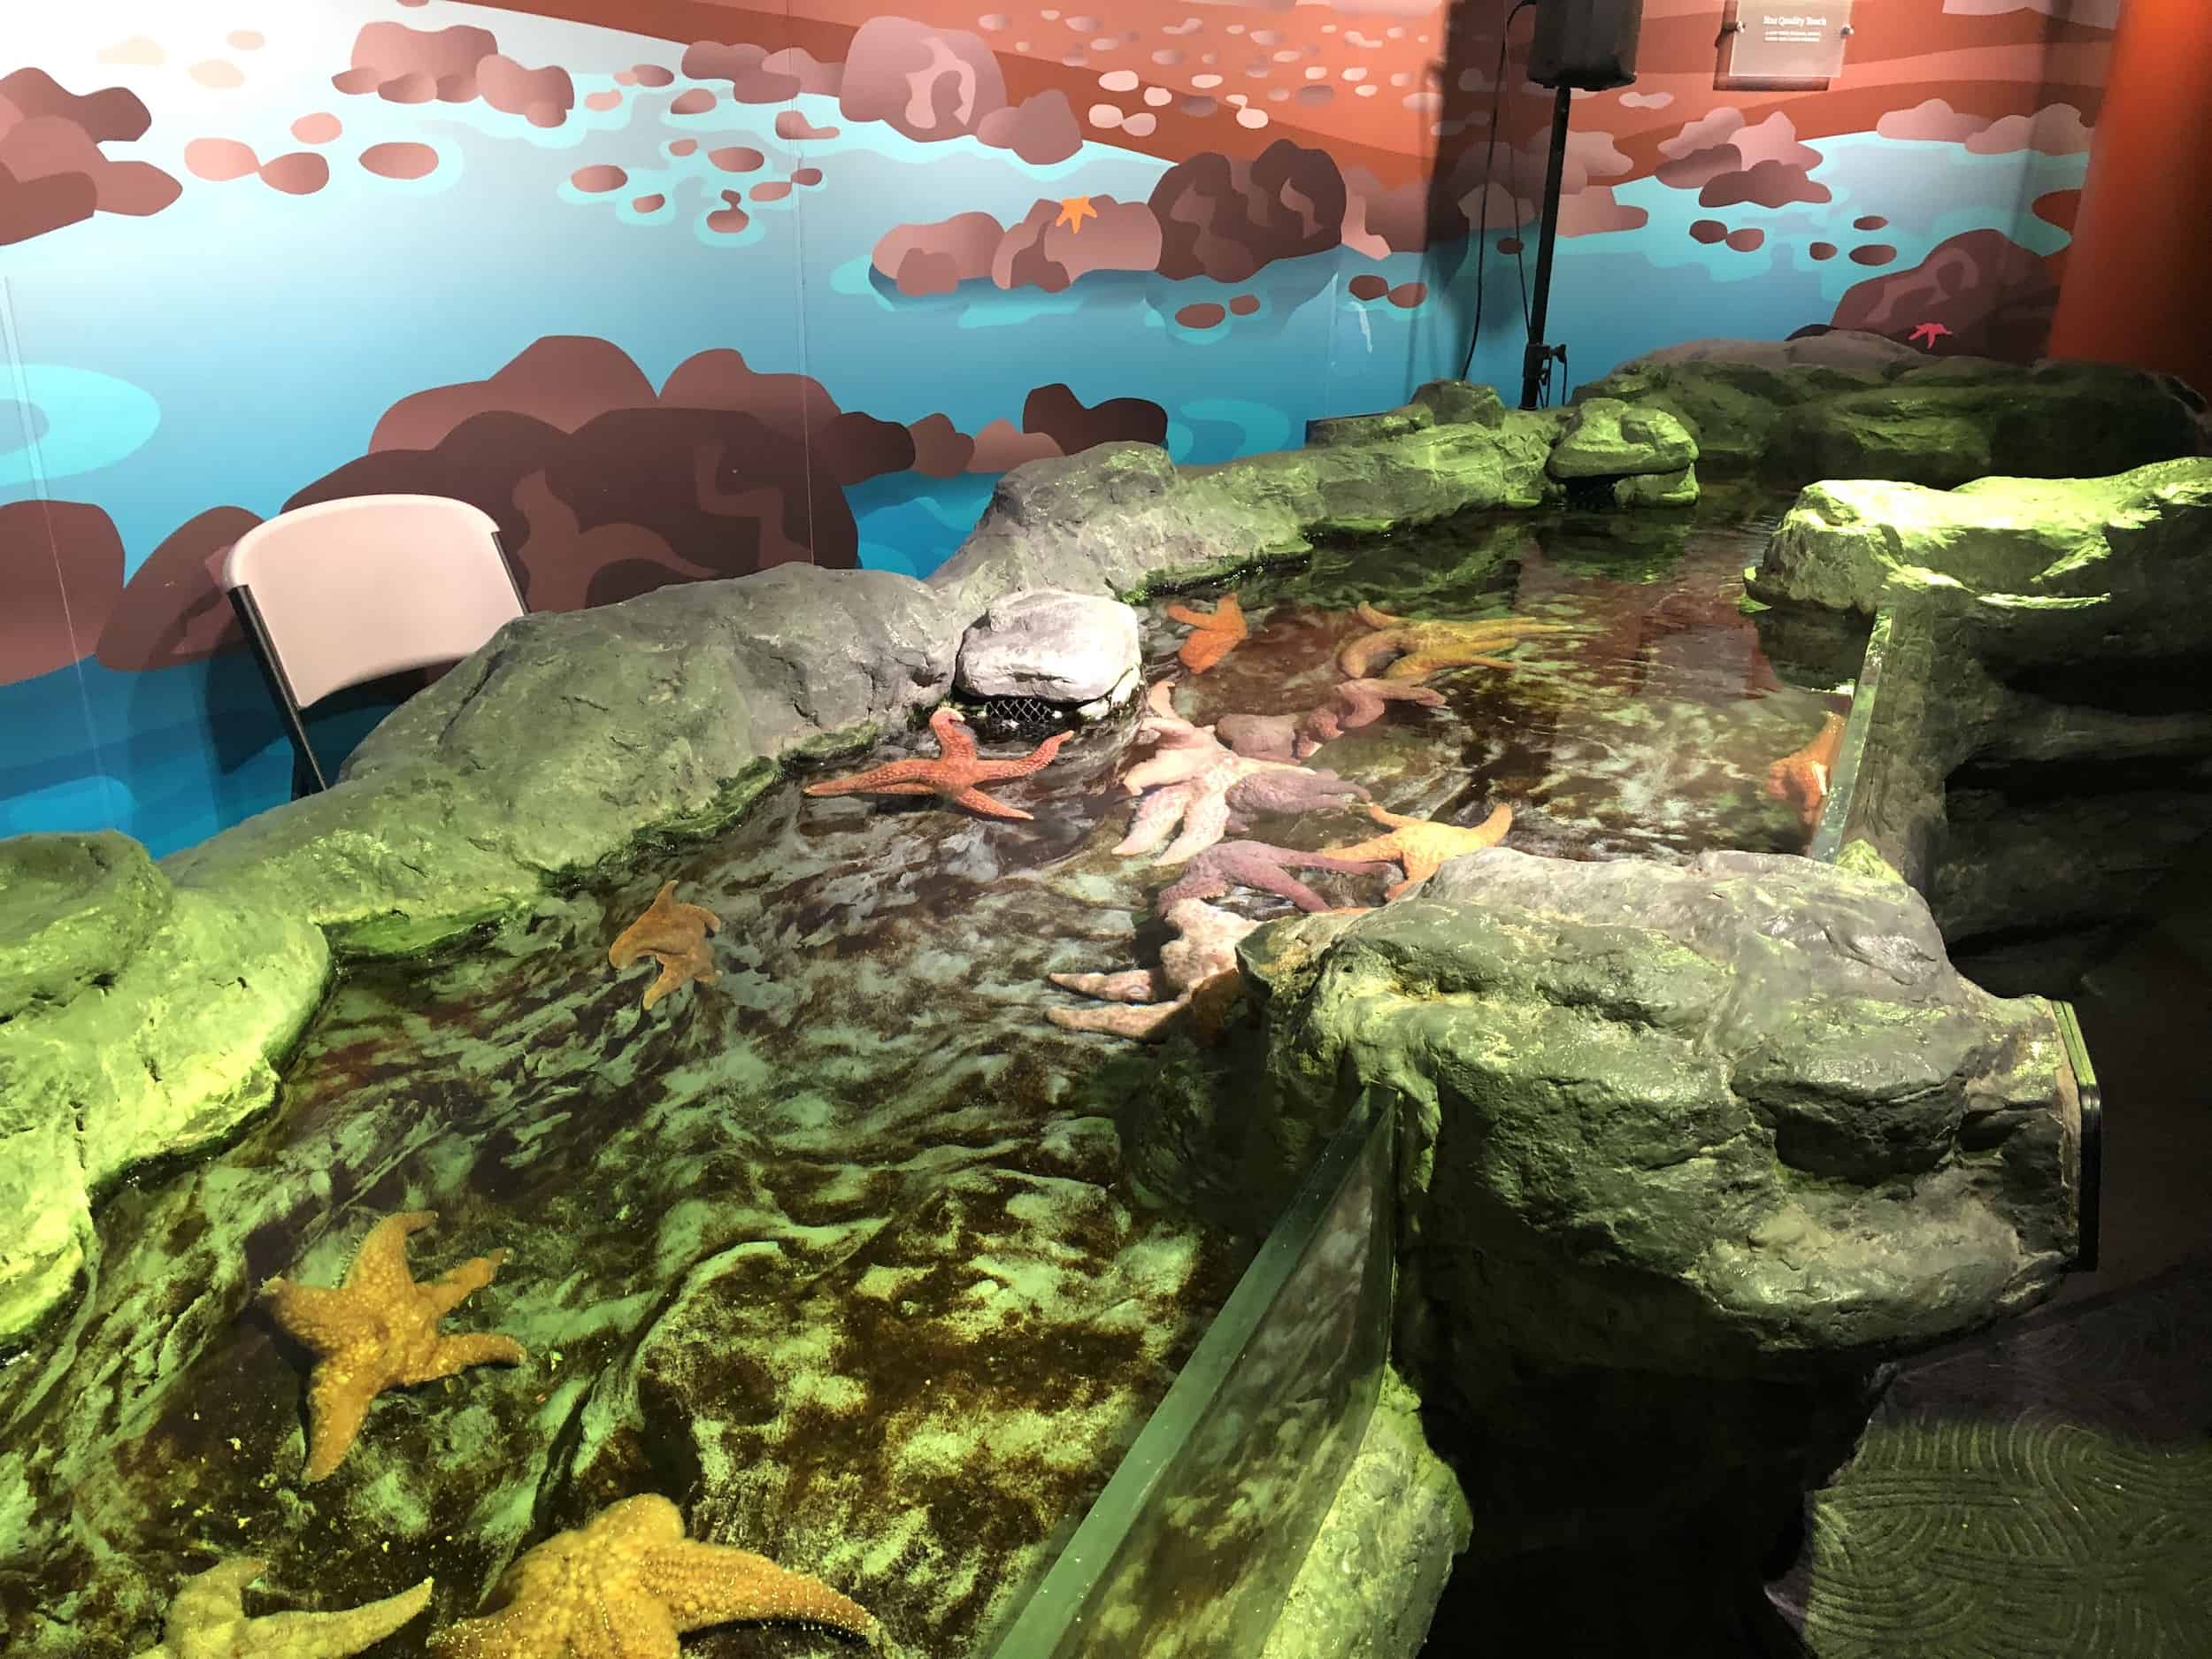 Starfish touch pool in the Polar Play Zone at the Shedd Aquarium in Chicago, Illinois